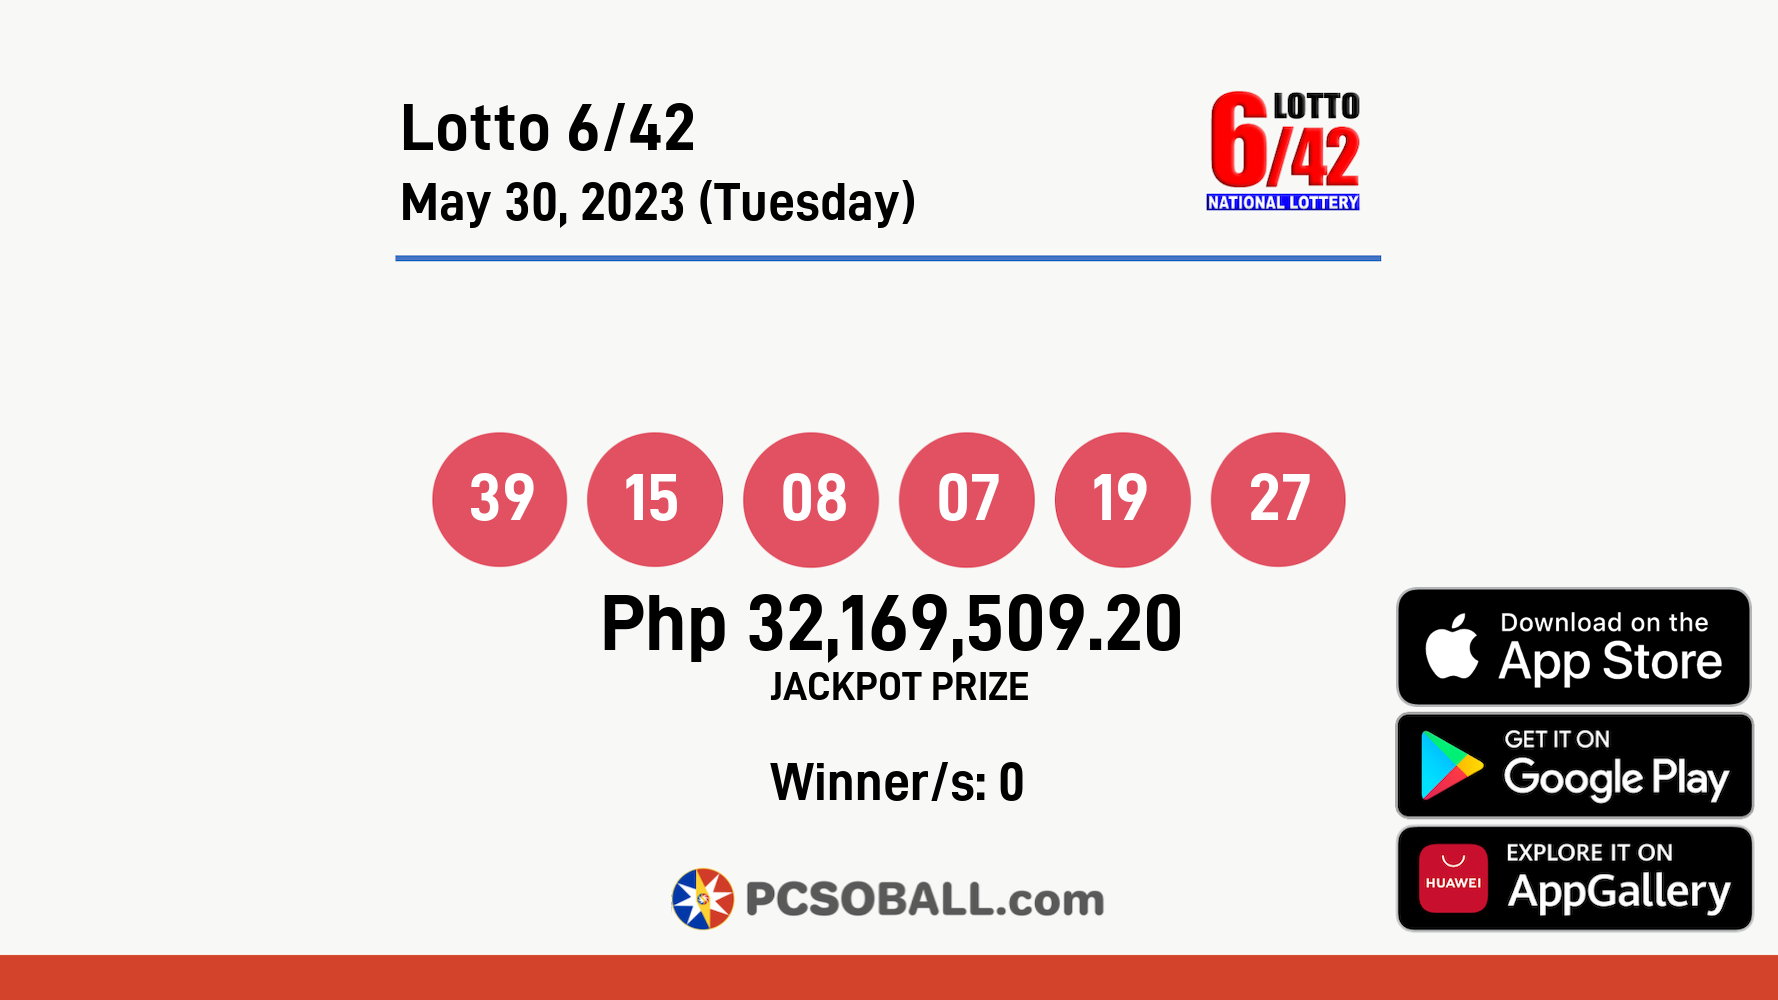 Lotto 6/42 May 30, 2023 (Tuesday) Result